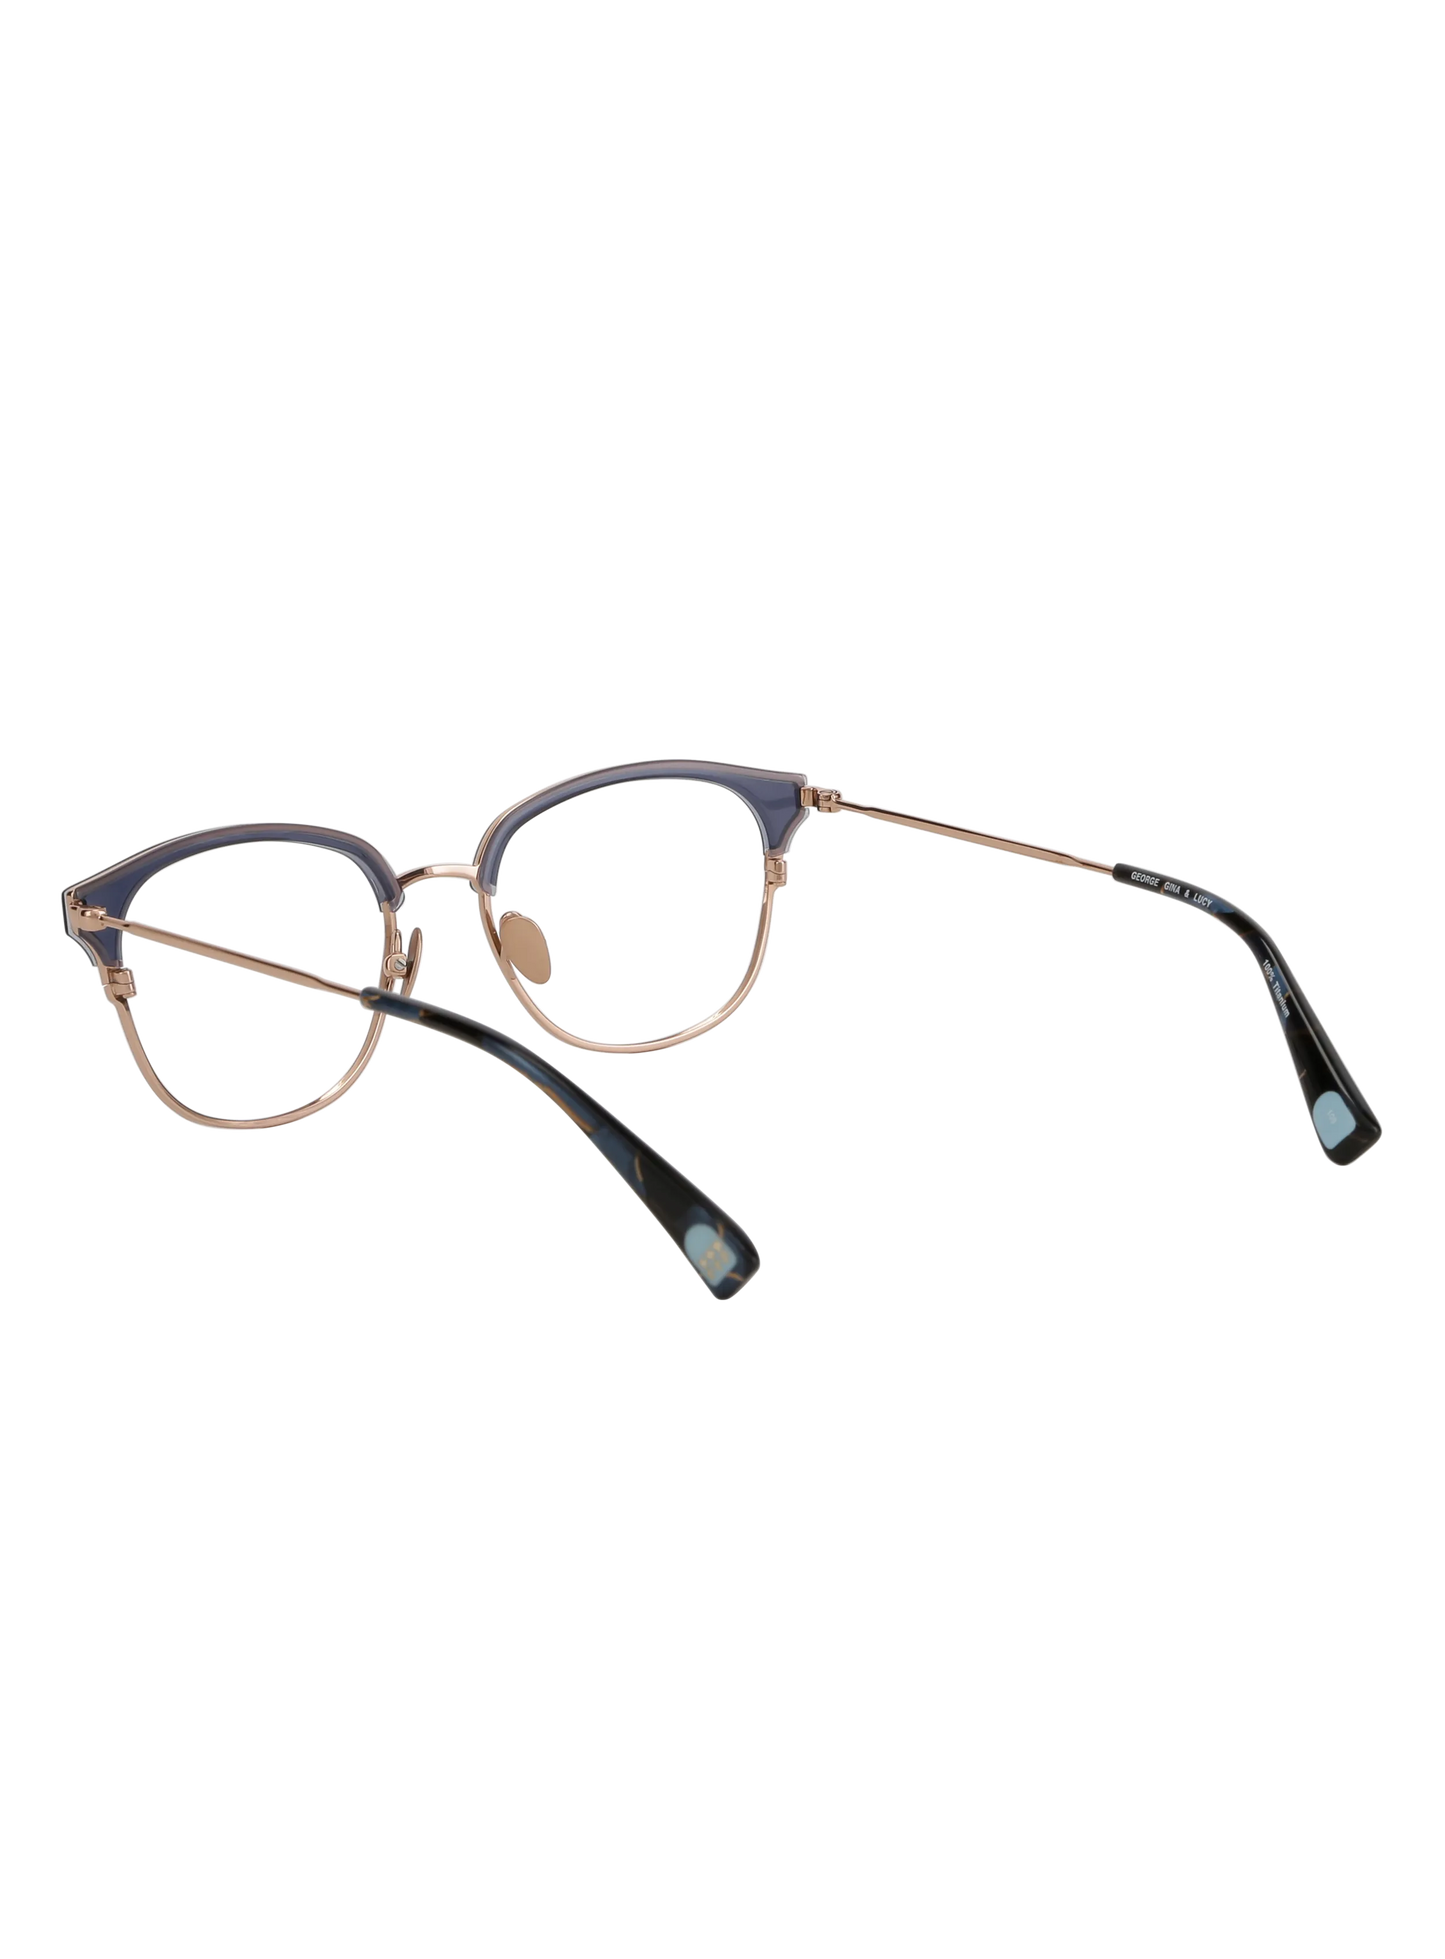 Farbe_rosegold clear blue 002